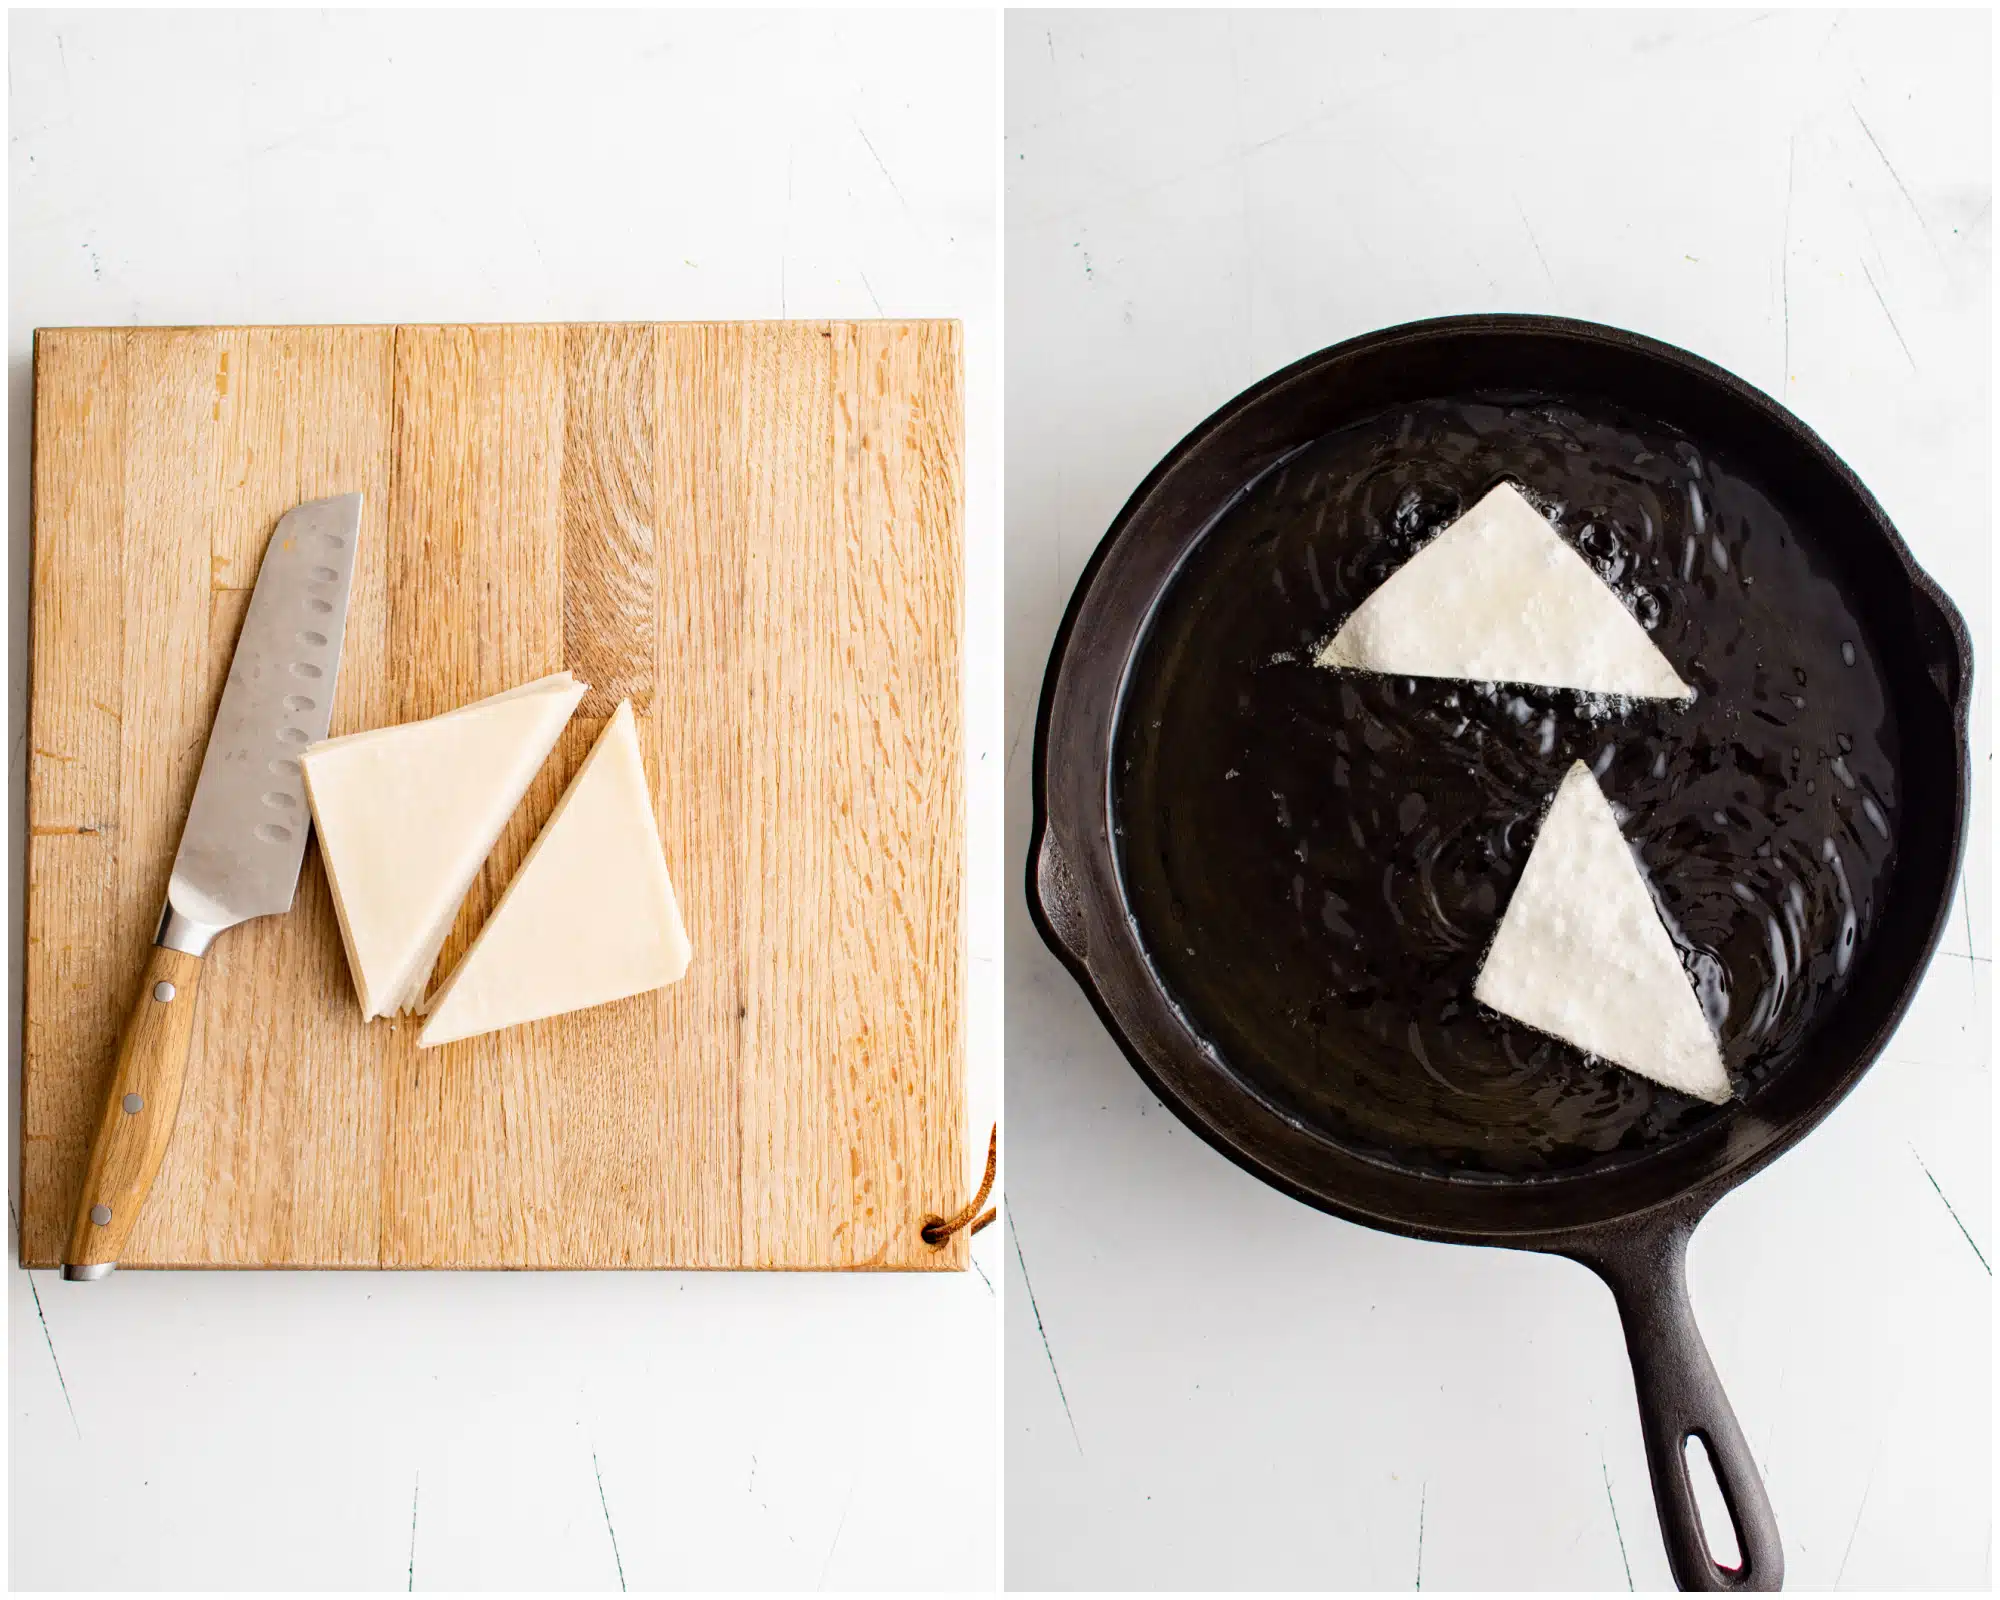 Two images: The first image shows premade square wonton wrappers cut in half to make triangles on a wooden cutting board the second image shows a cast iron pan filled with hot cooking oil and two wontons frying.